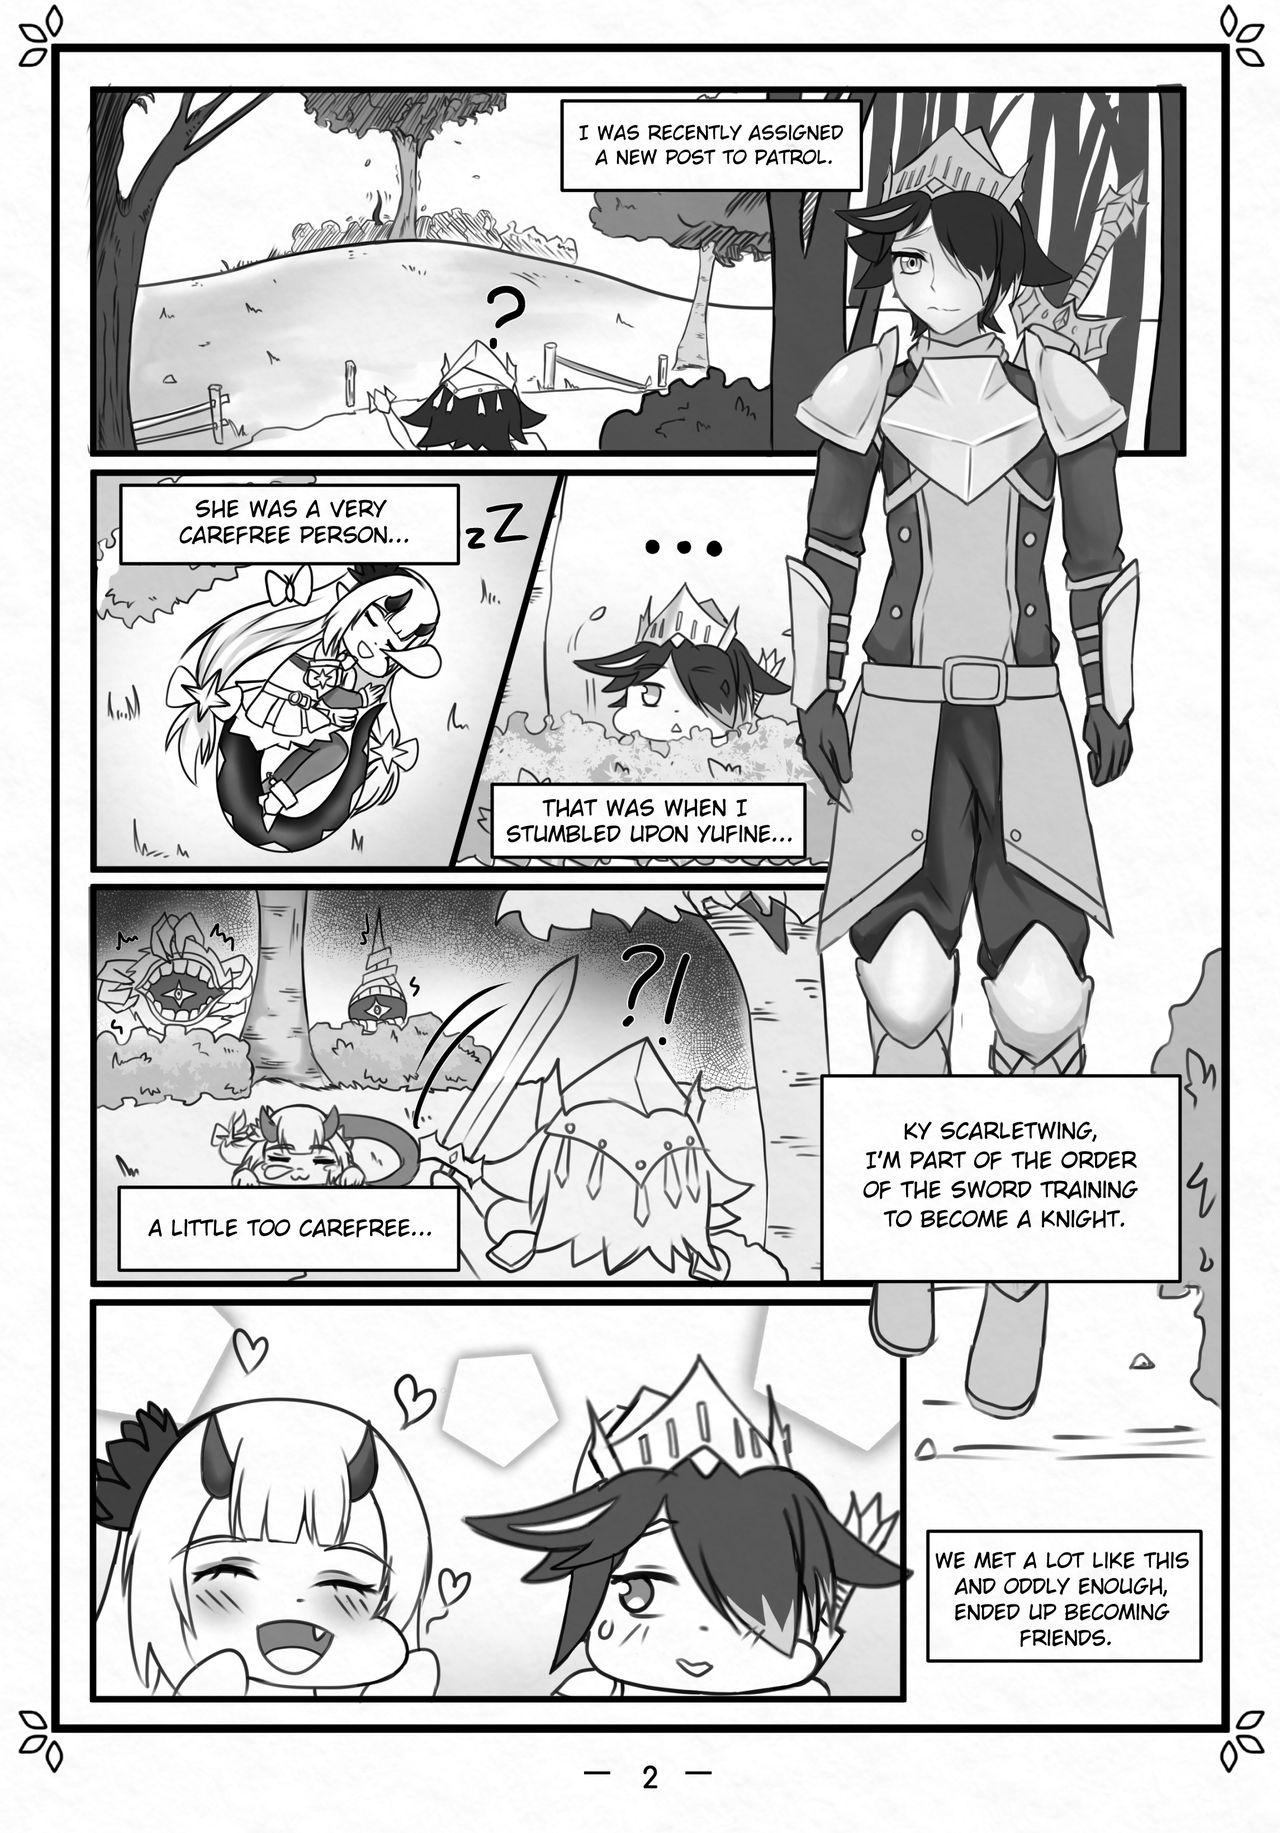 Egypt Blossoming Yufine - Epic seven Kink - Page 3